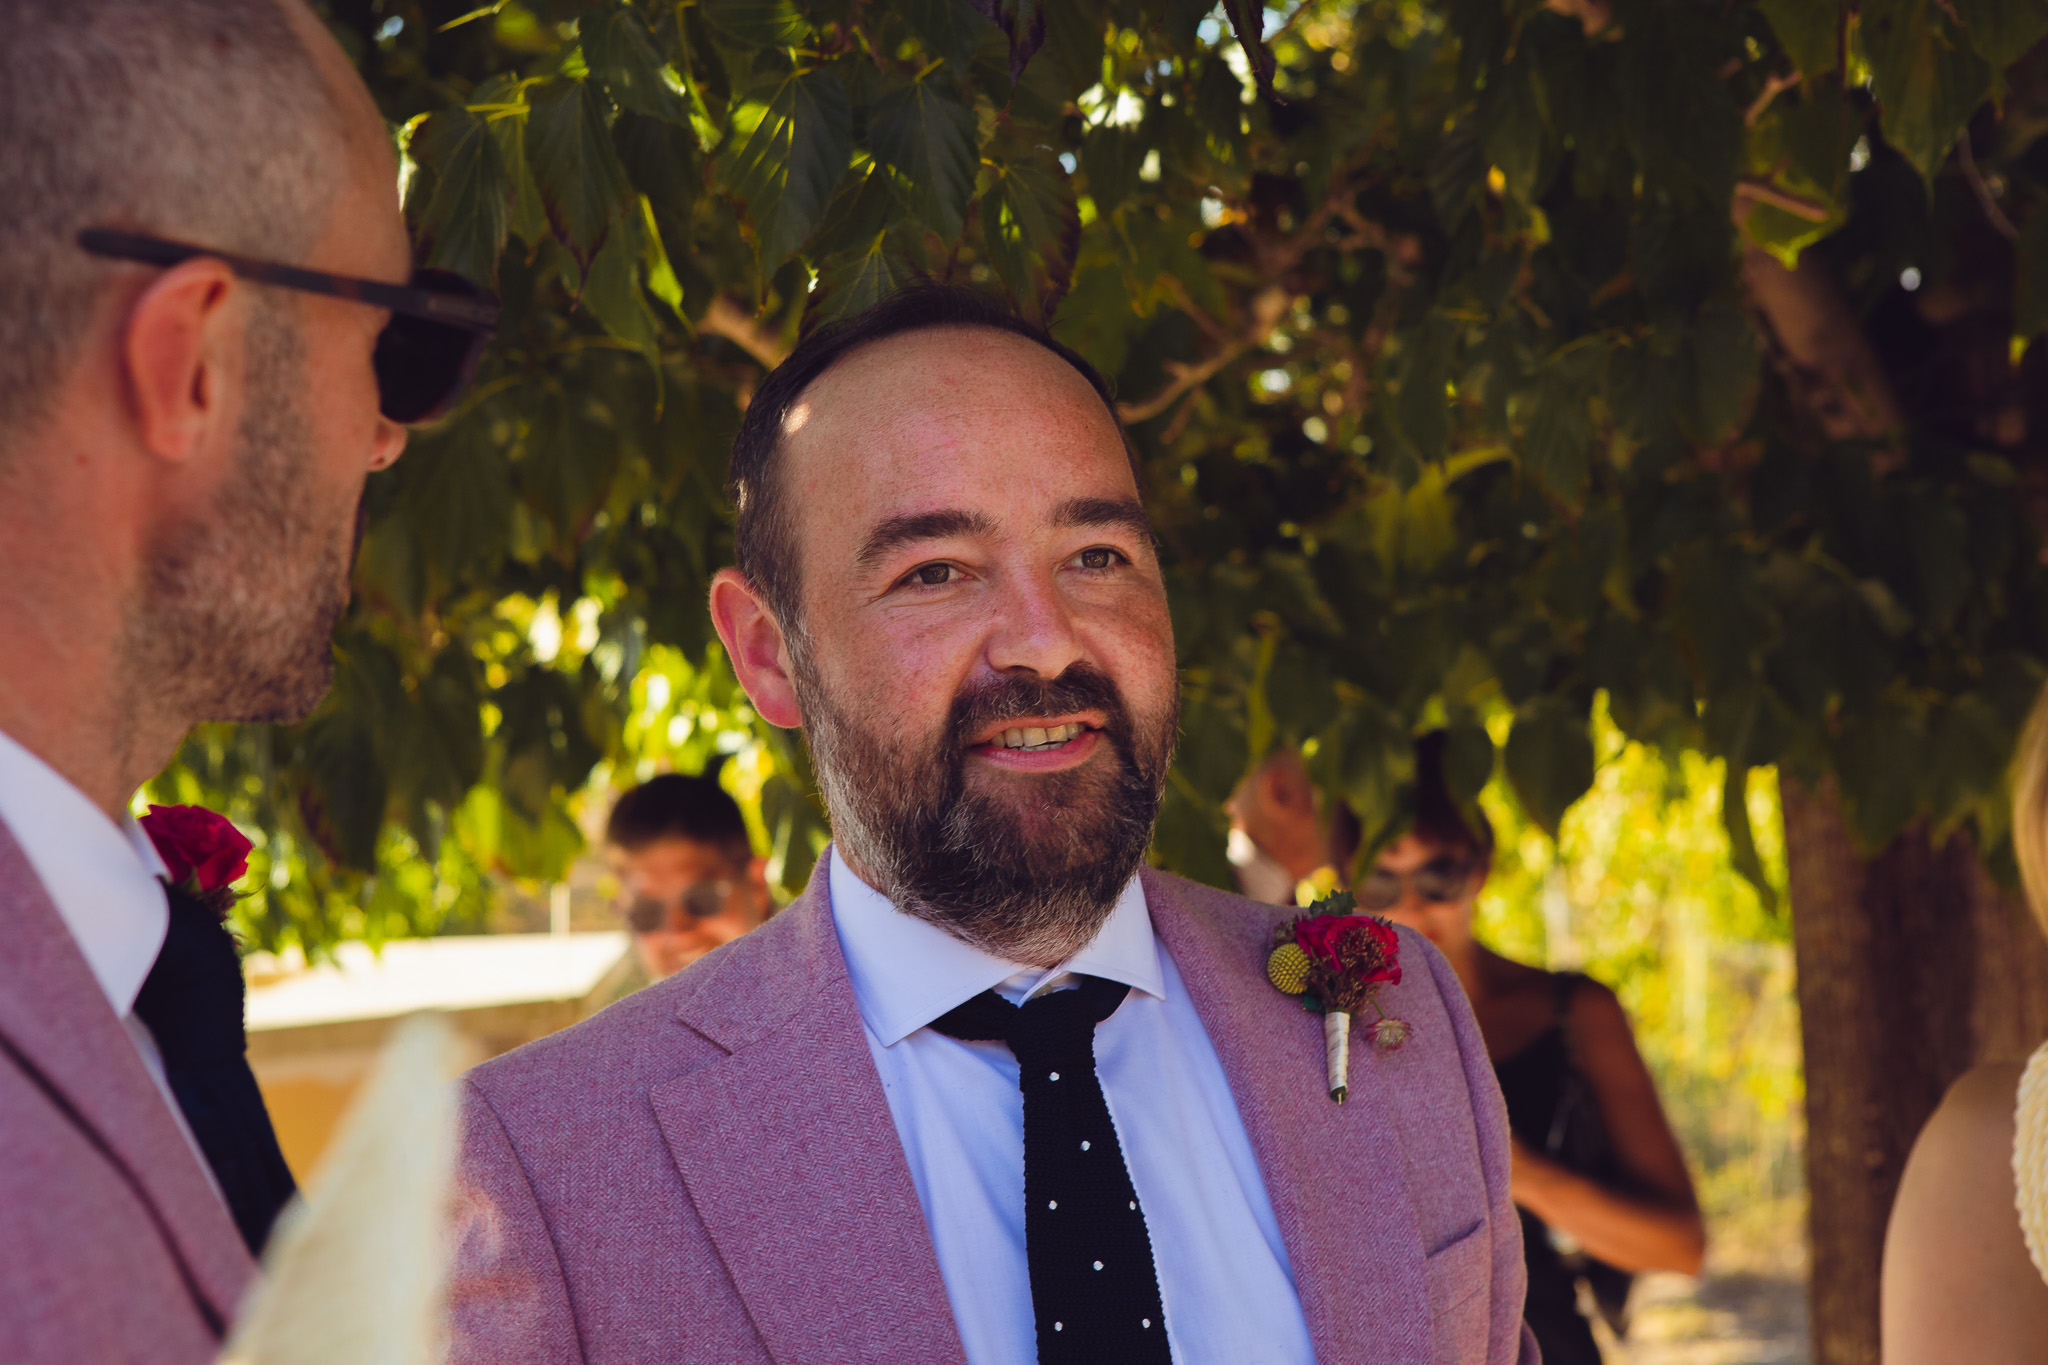 The groom stands in the shade of a tree after his wedding ceremony at Ambelonas Vineyard, Corfu